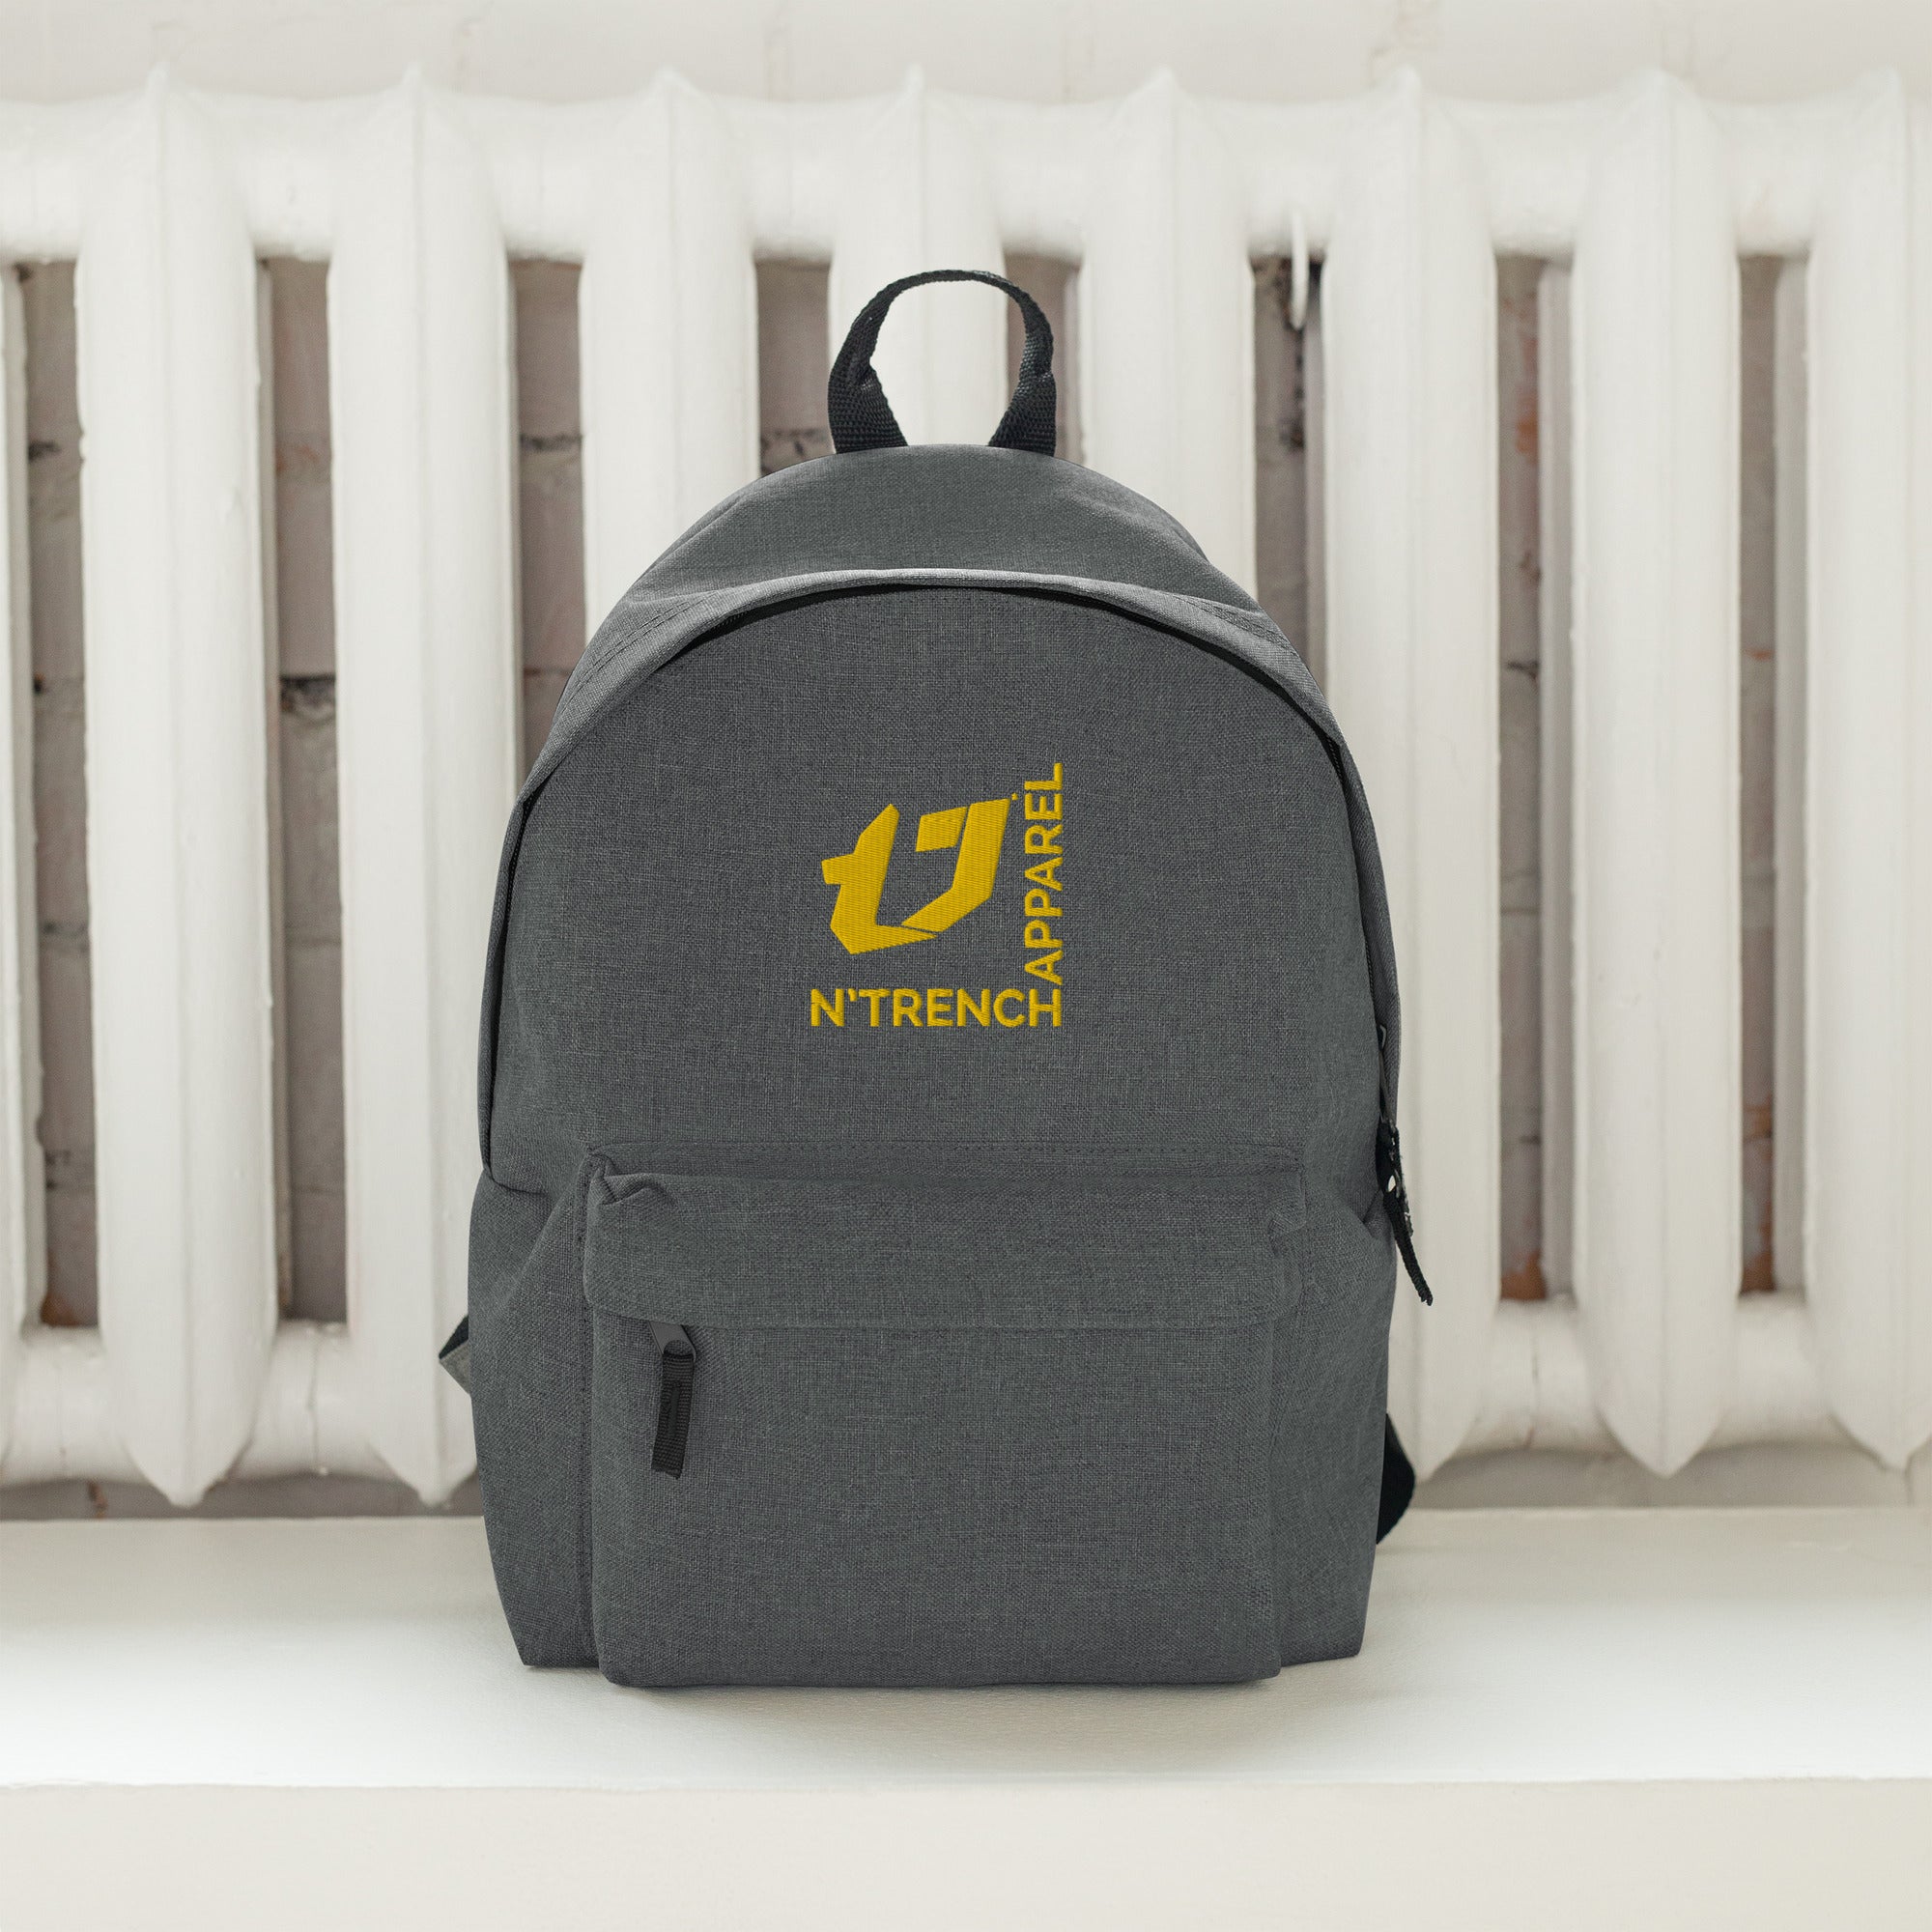 N'Trench Apparel Gold Lettering And Logo Embroidered Backpack